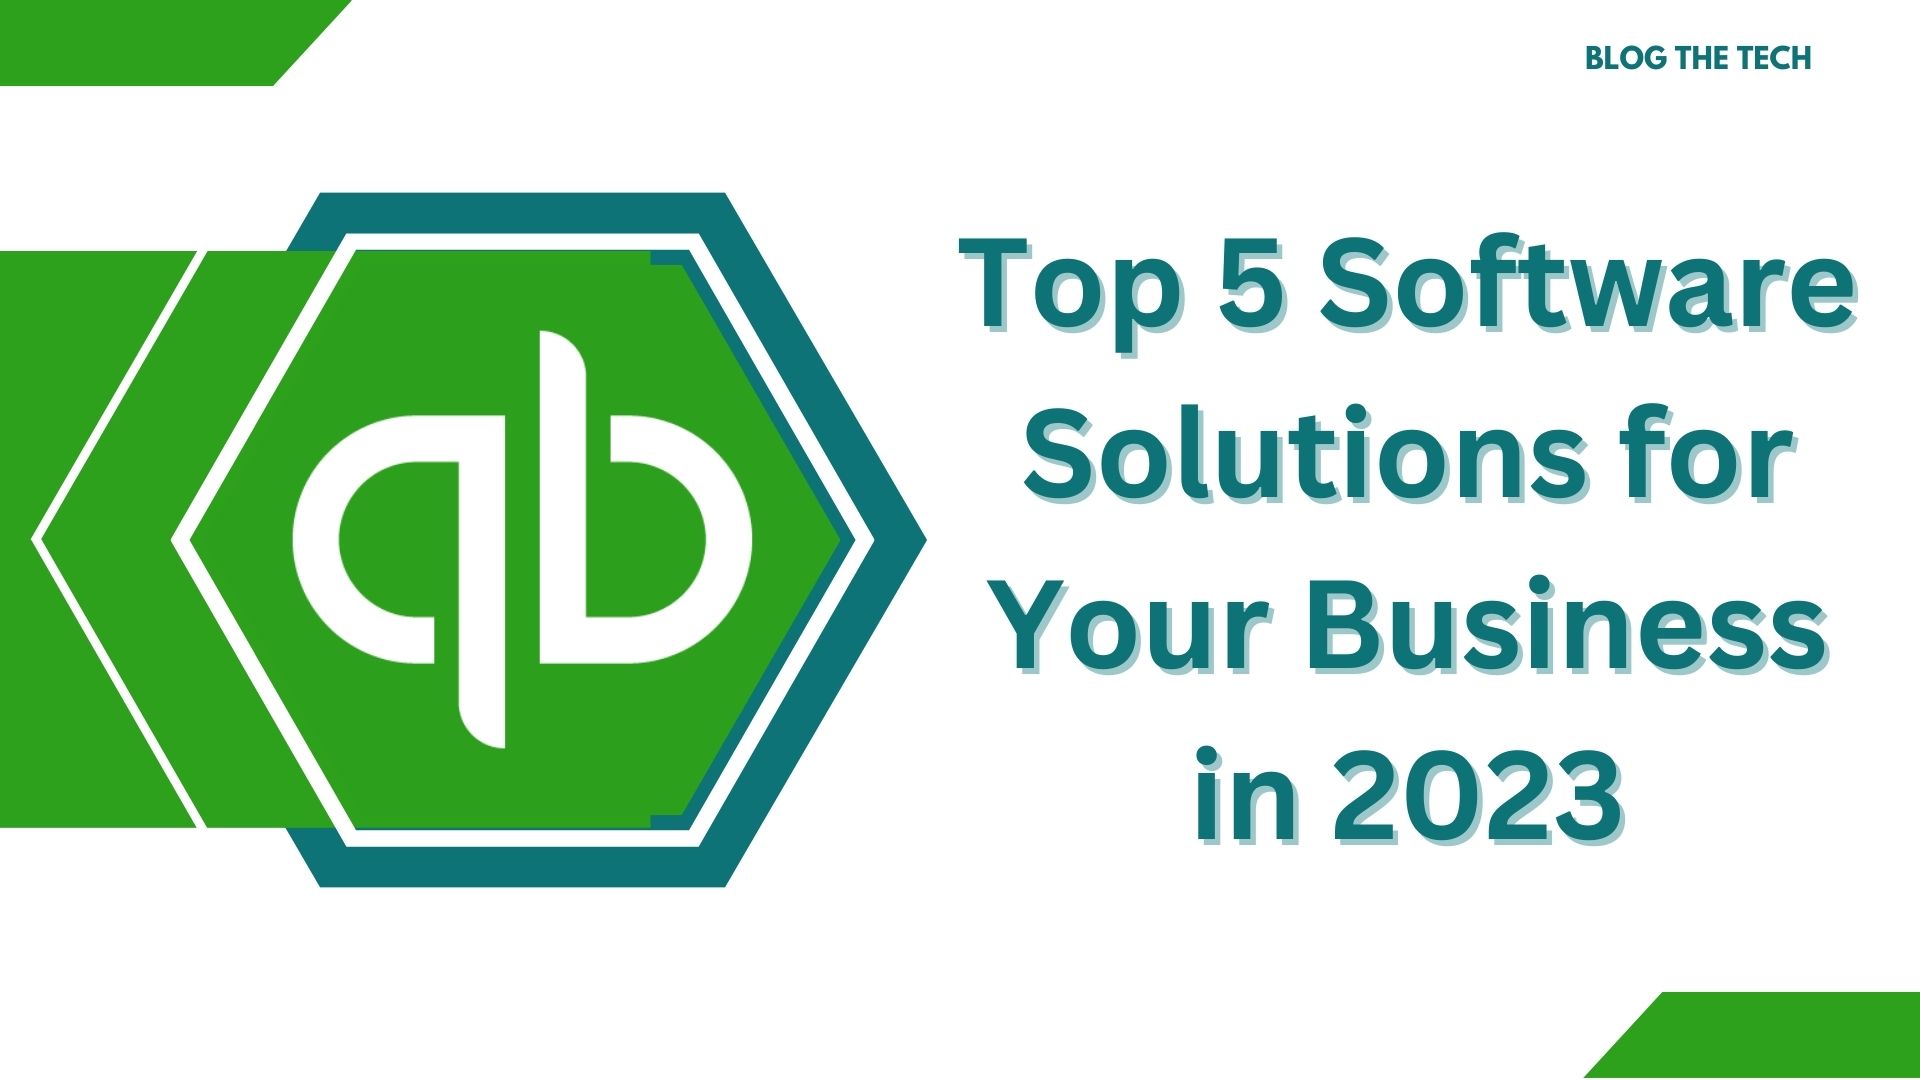 Top 5 Software Solutions for Your Business in 2023